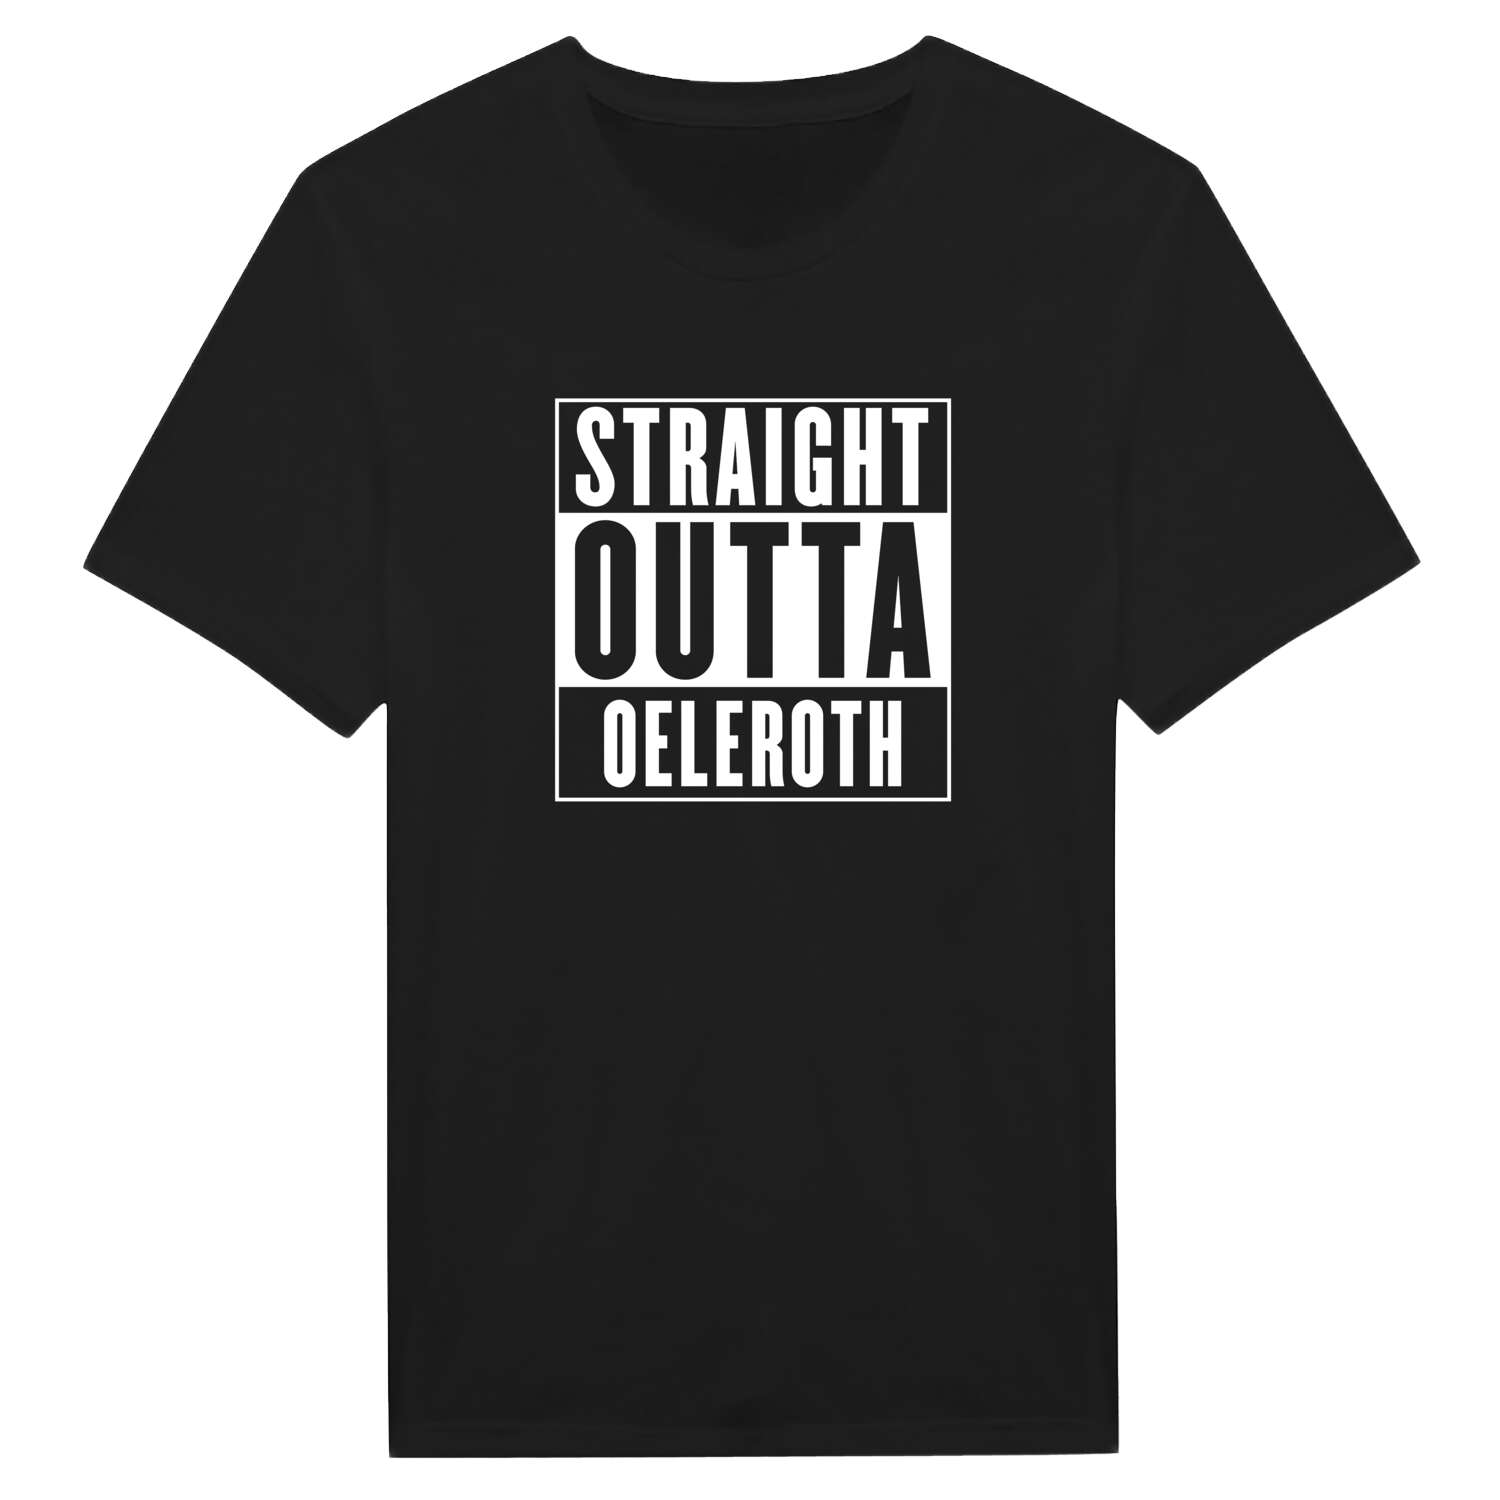 Oeleroth T-Shirt »Straight Outta«